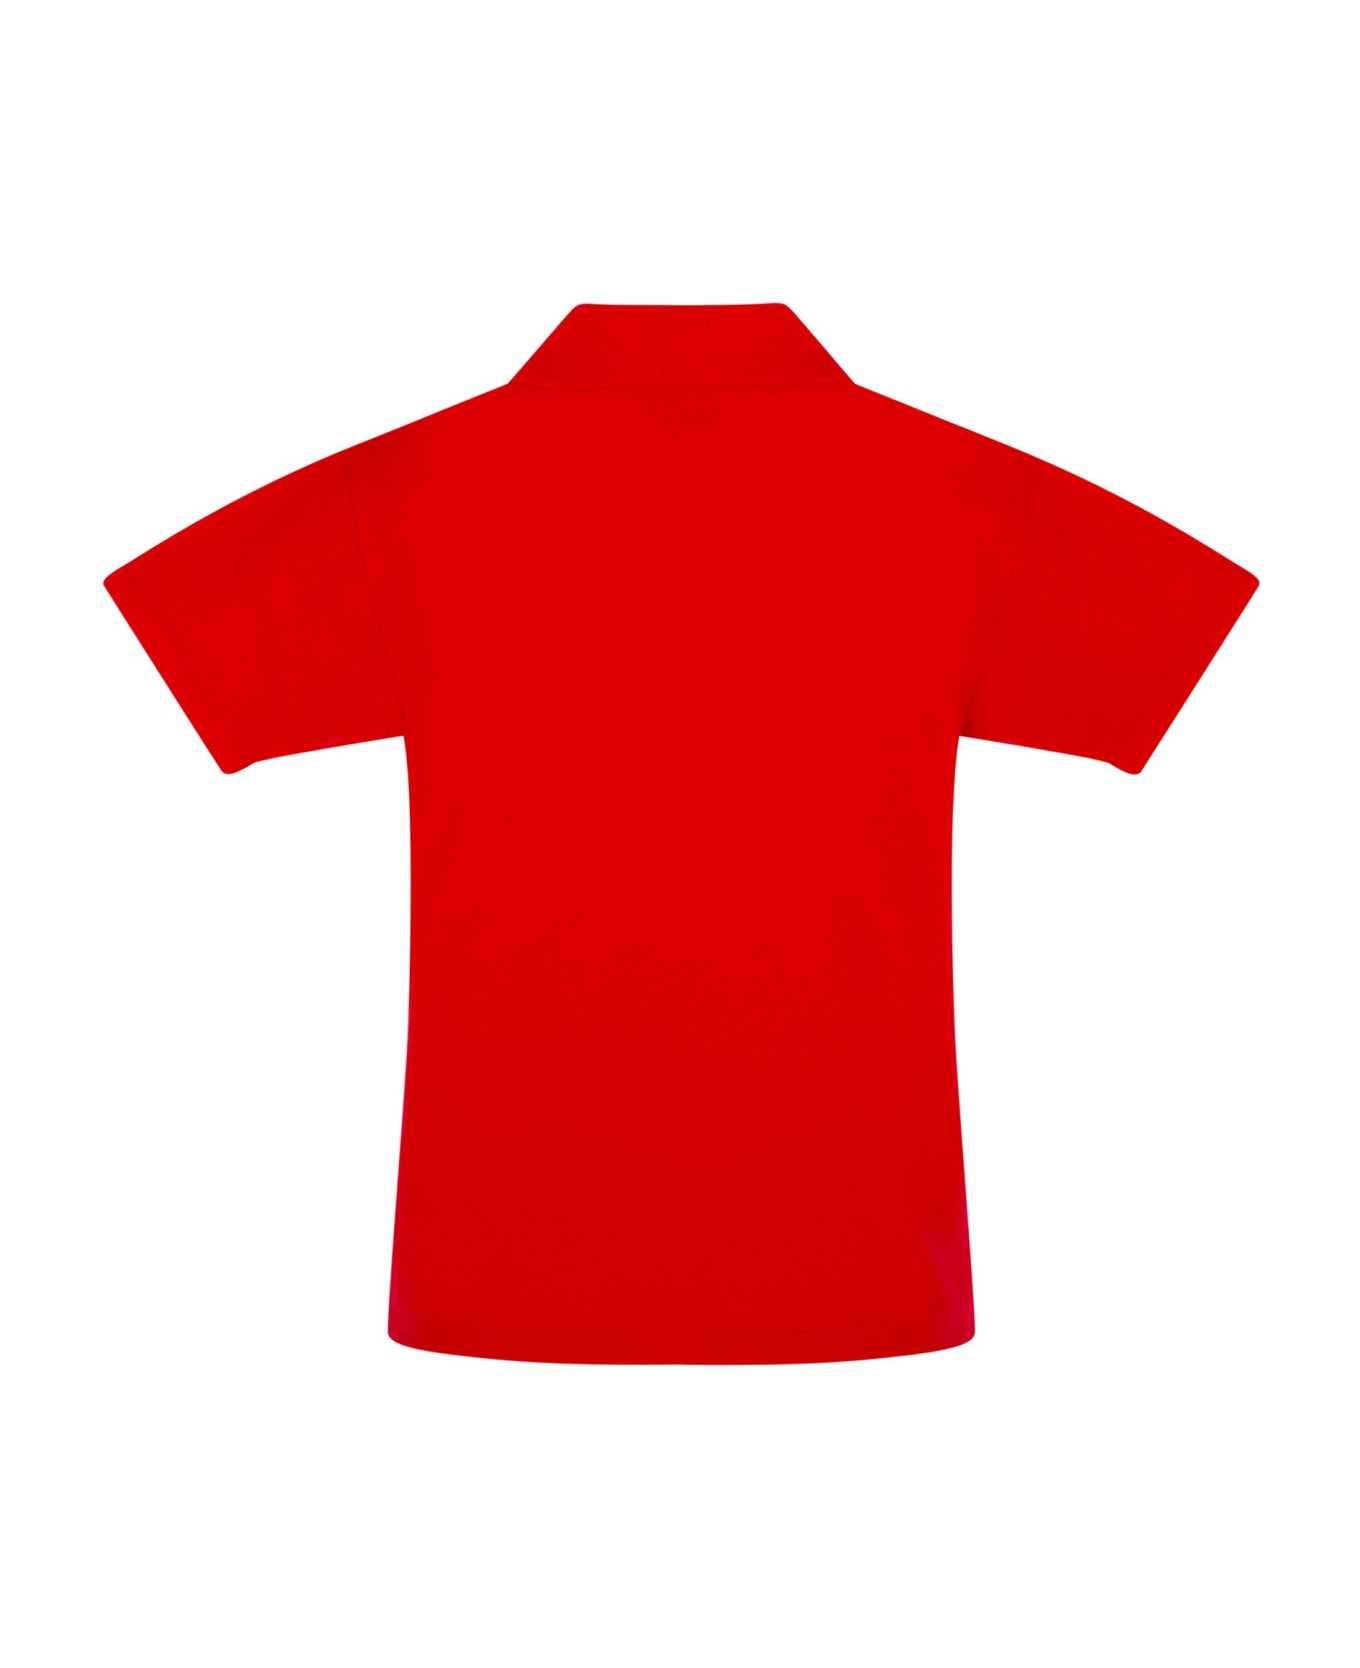 Comme des Garçons Play Red Polo T-shirt For Kids With Logo - Red